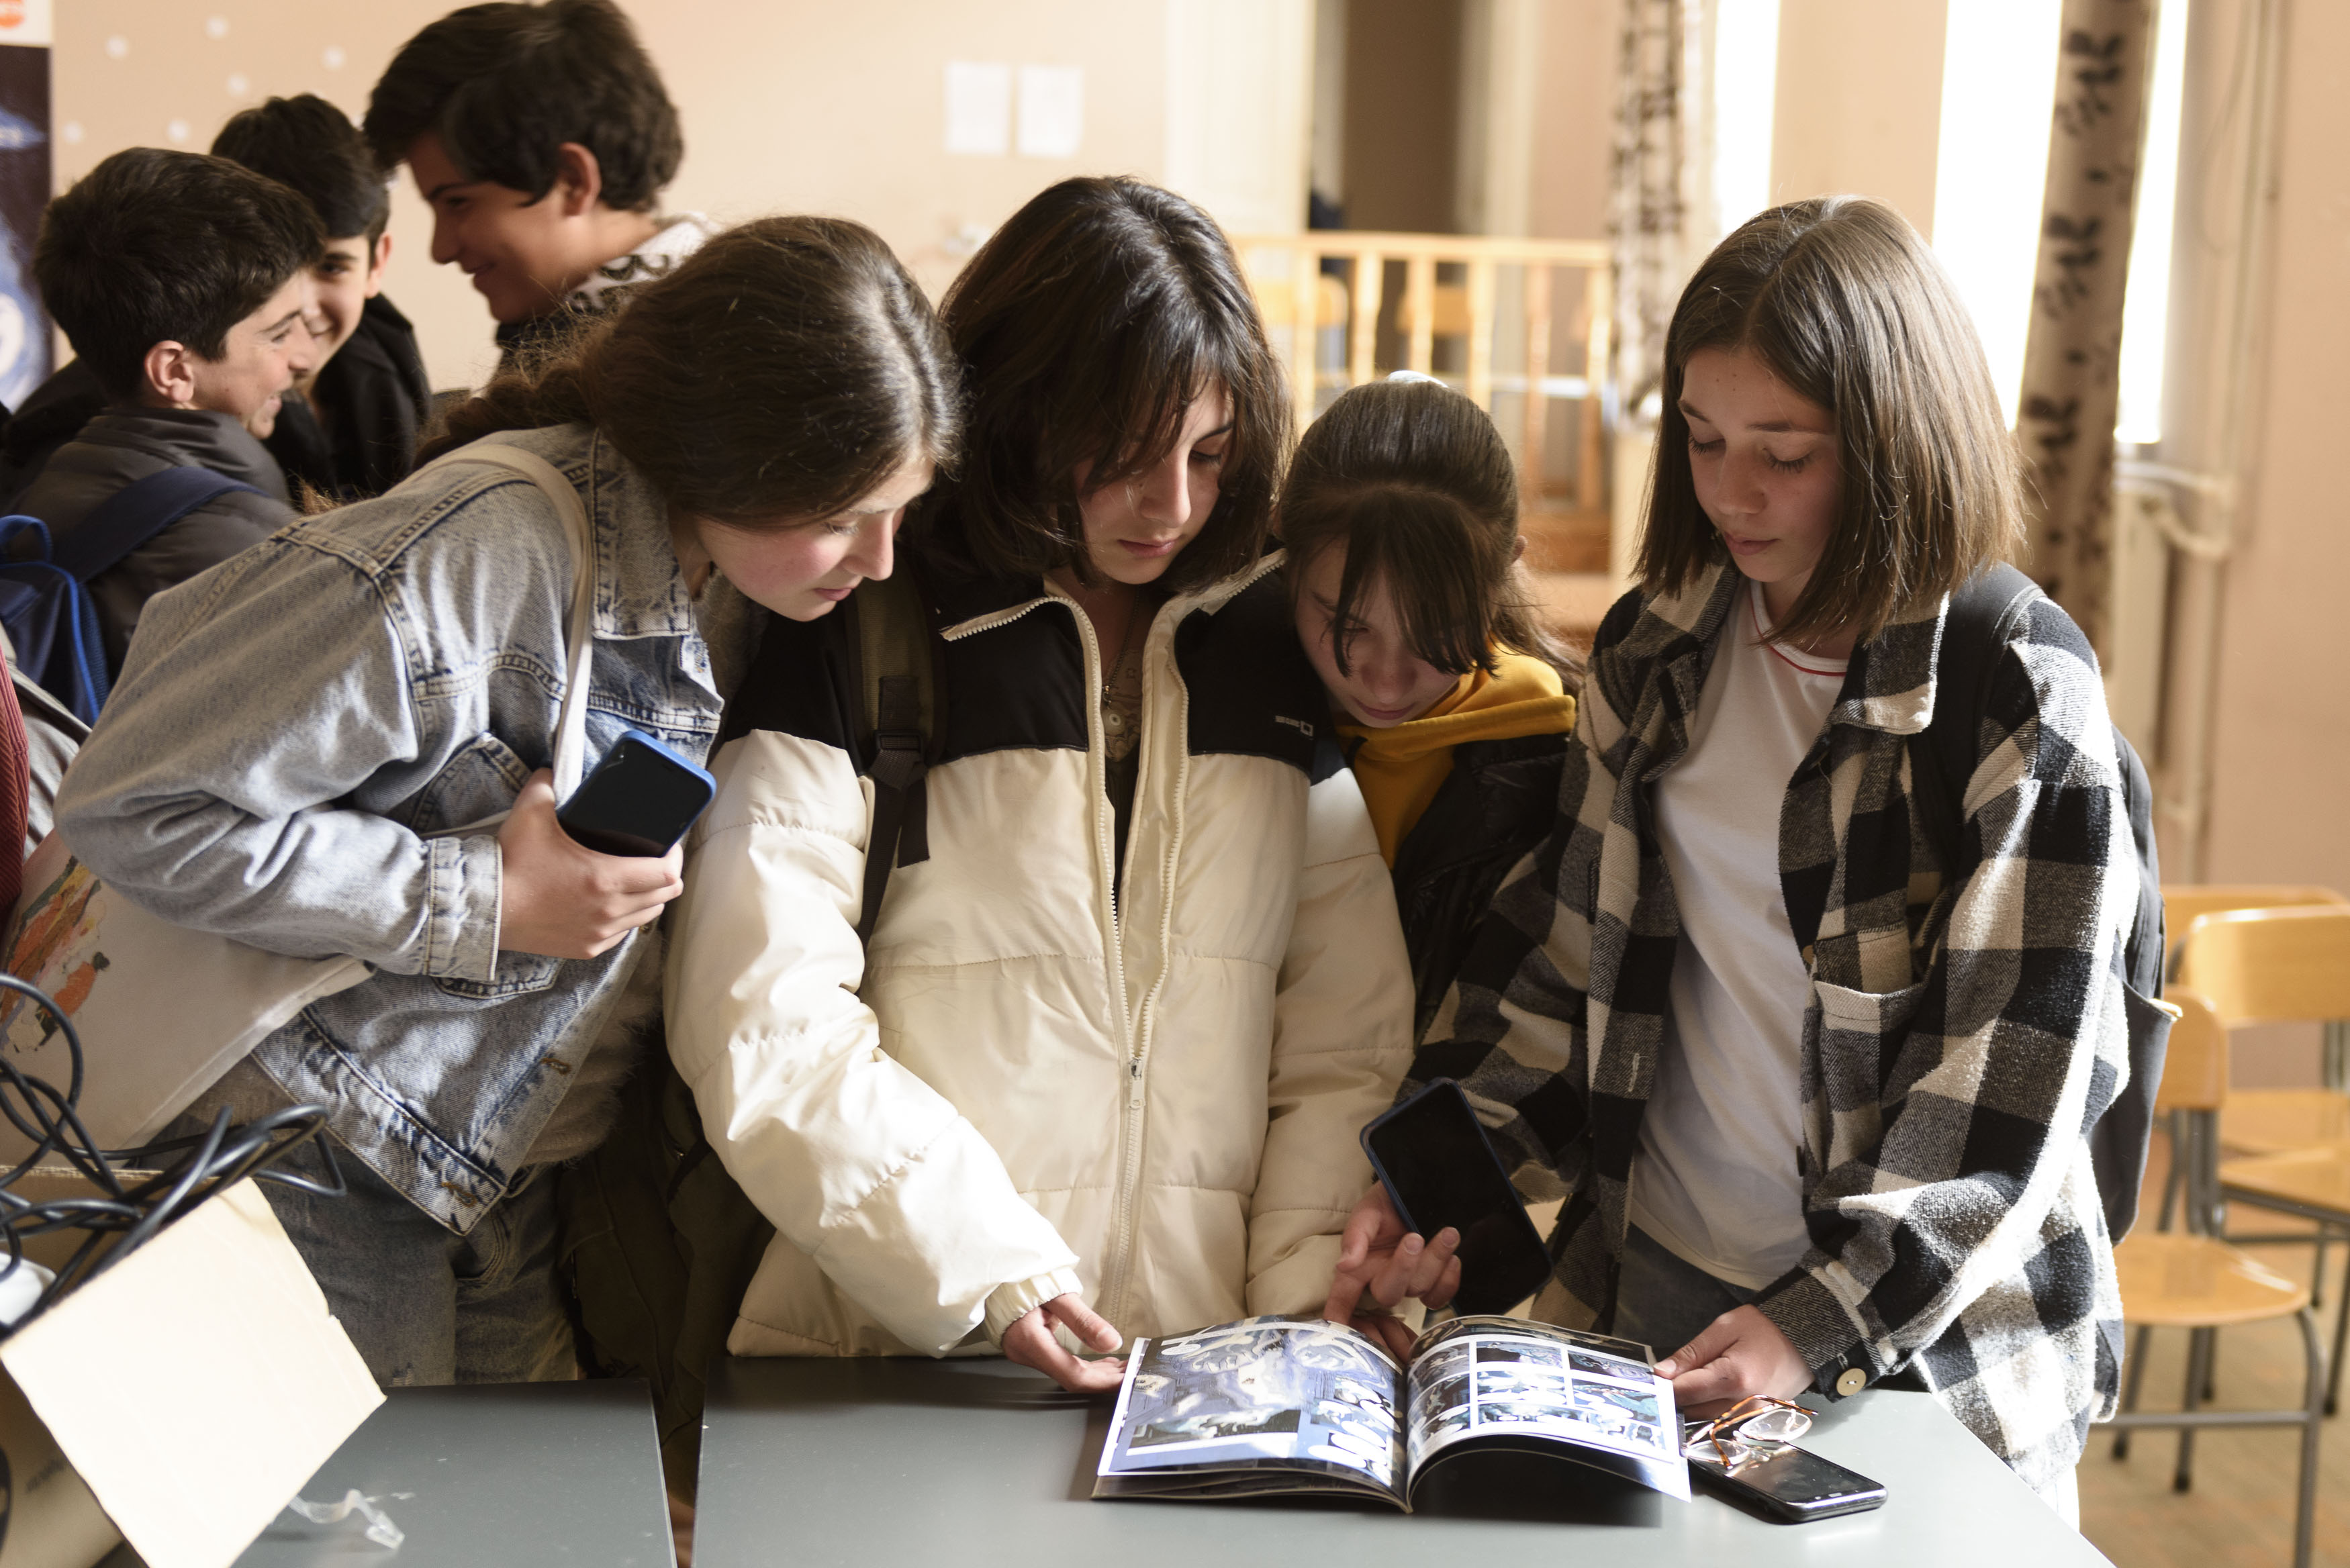 Three adolescent girls standing together, reading a comic book named Invisible